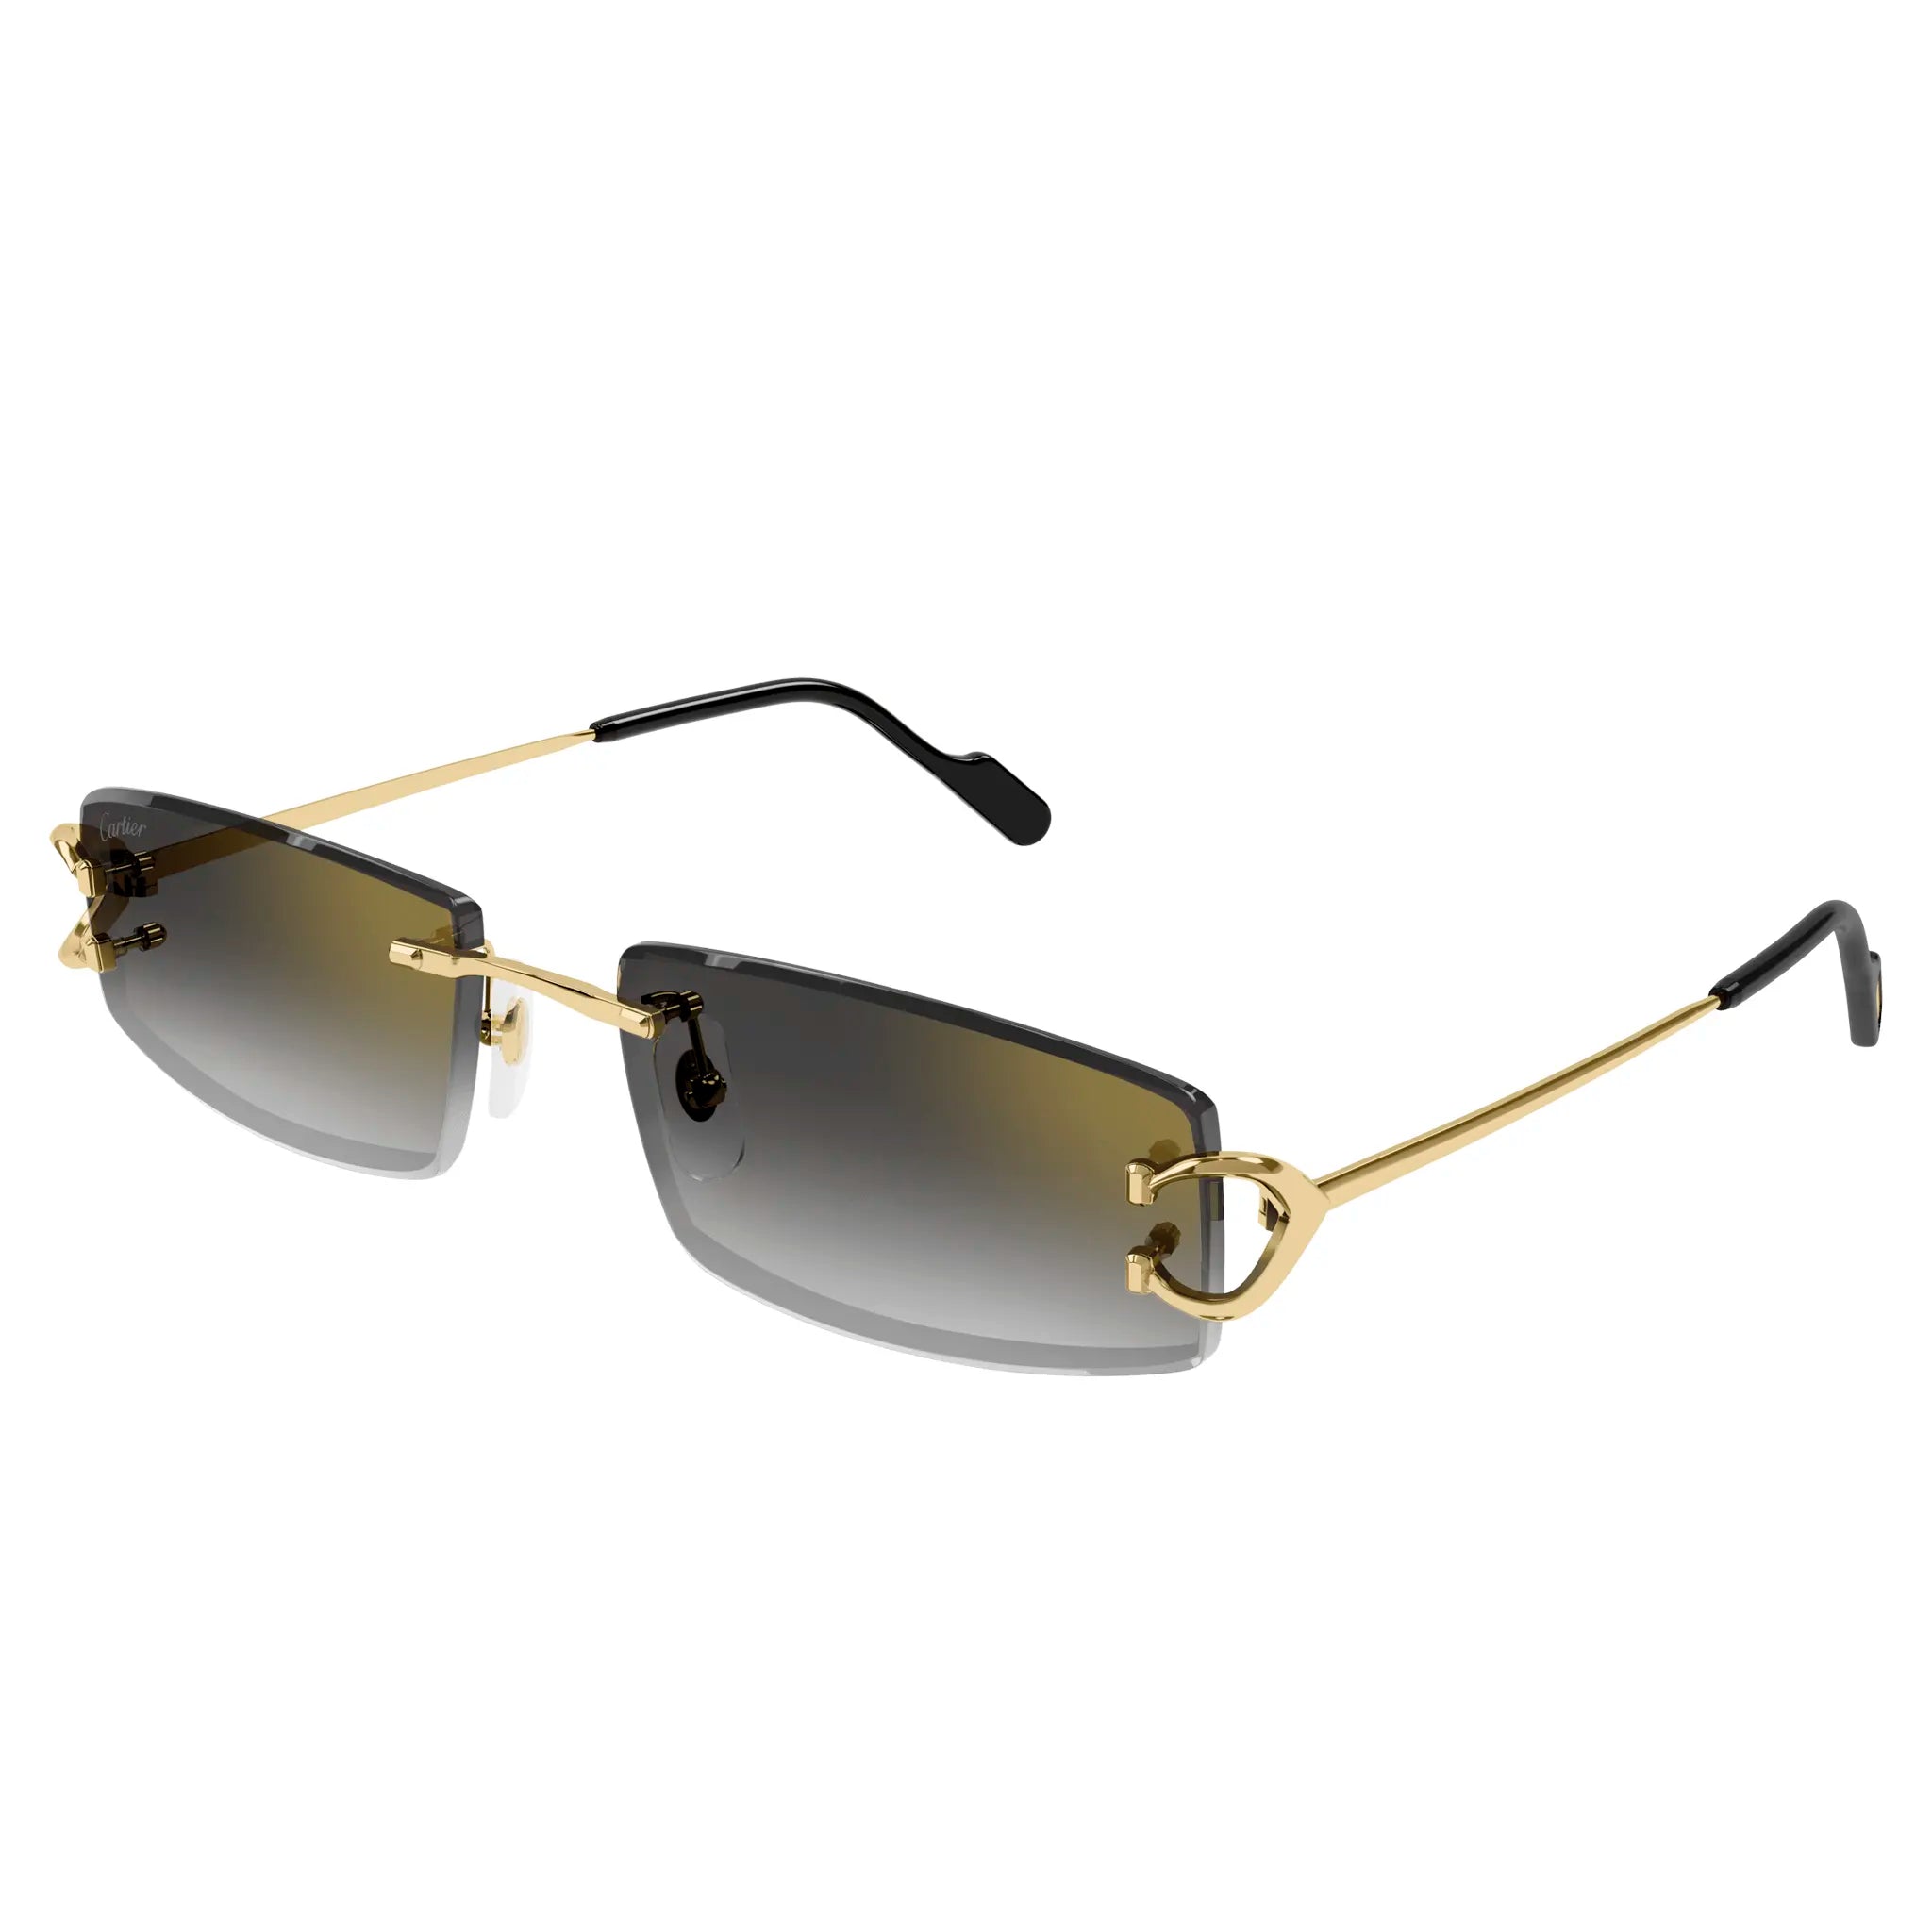 Front Side view of Cartier Eyewear CT0465S-001 Gold Grey Rimless Sunglasses